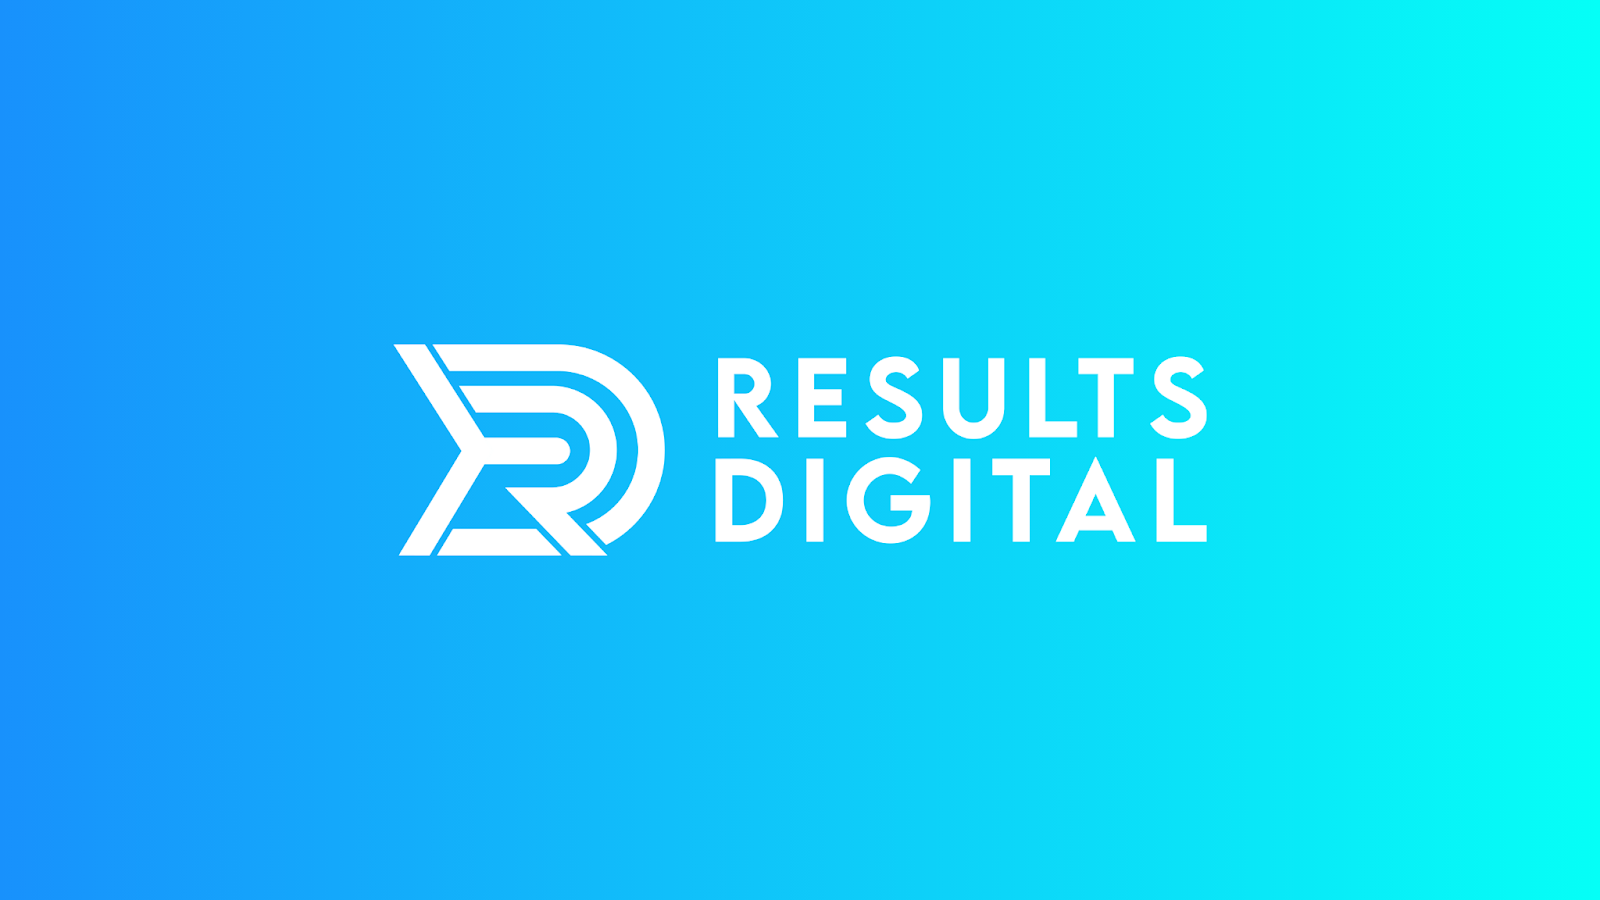 Results Digital is a digital marketing agency specializing in SEO and Google Ads.